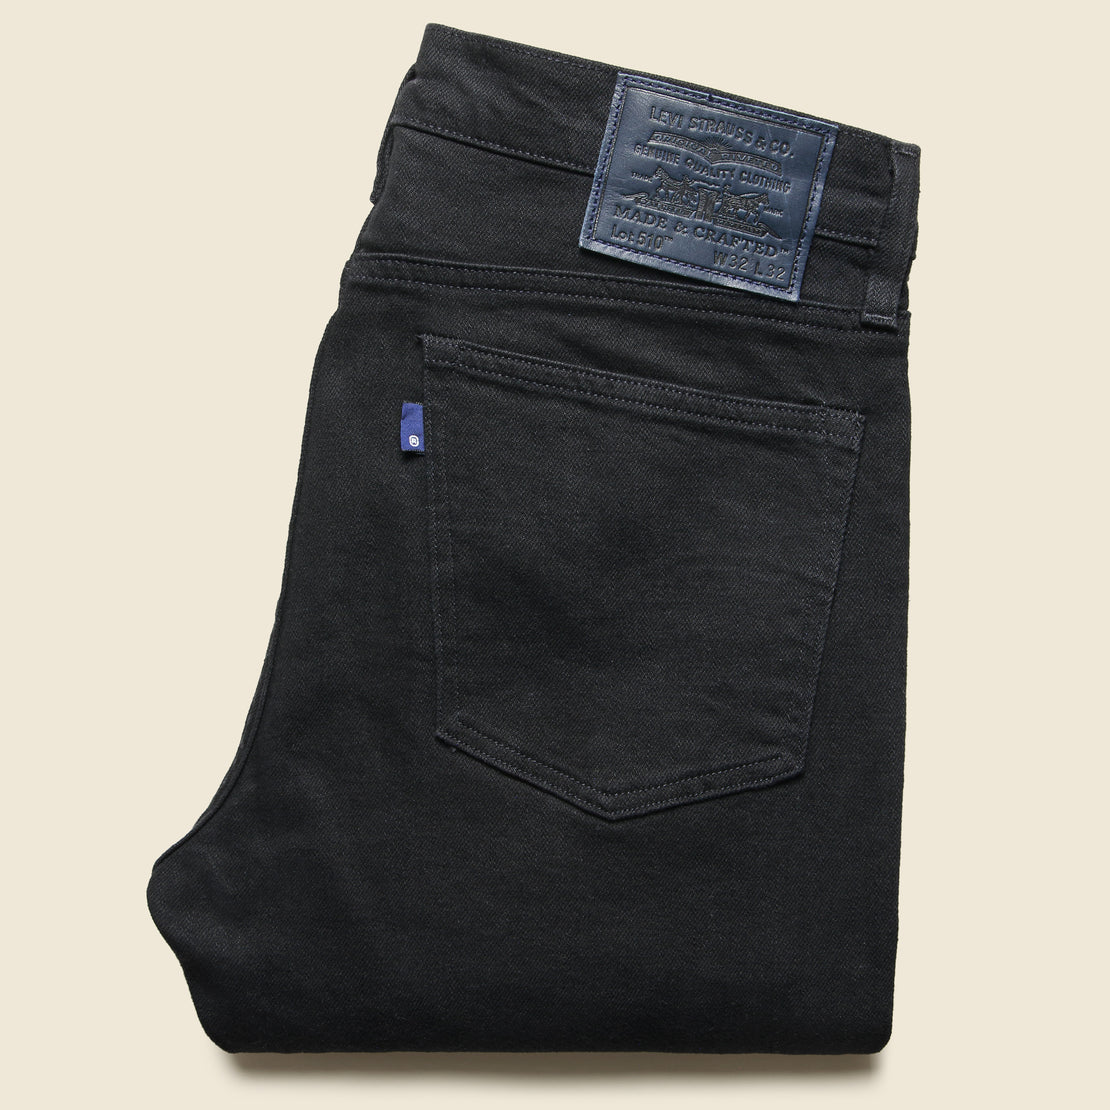 510 Jean - Black Rinse - Levis Made & Crafted - STAG Provisions - Pants - Denim